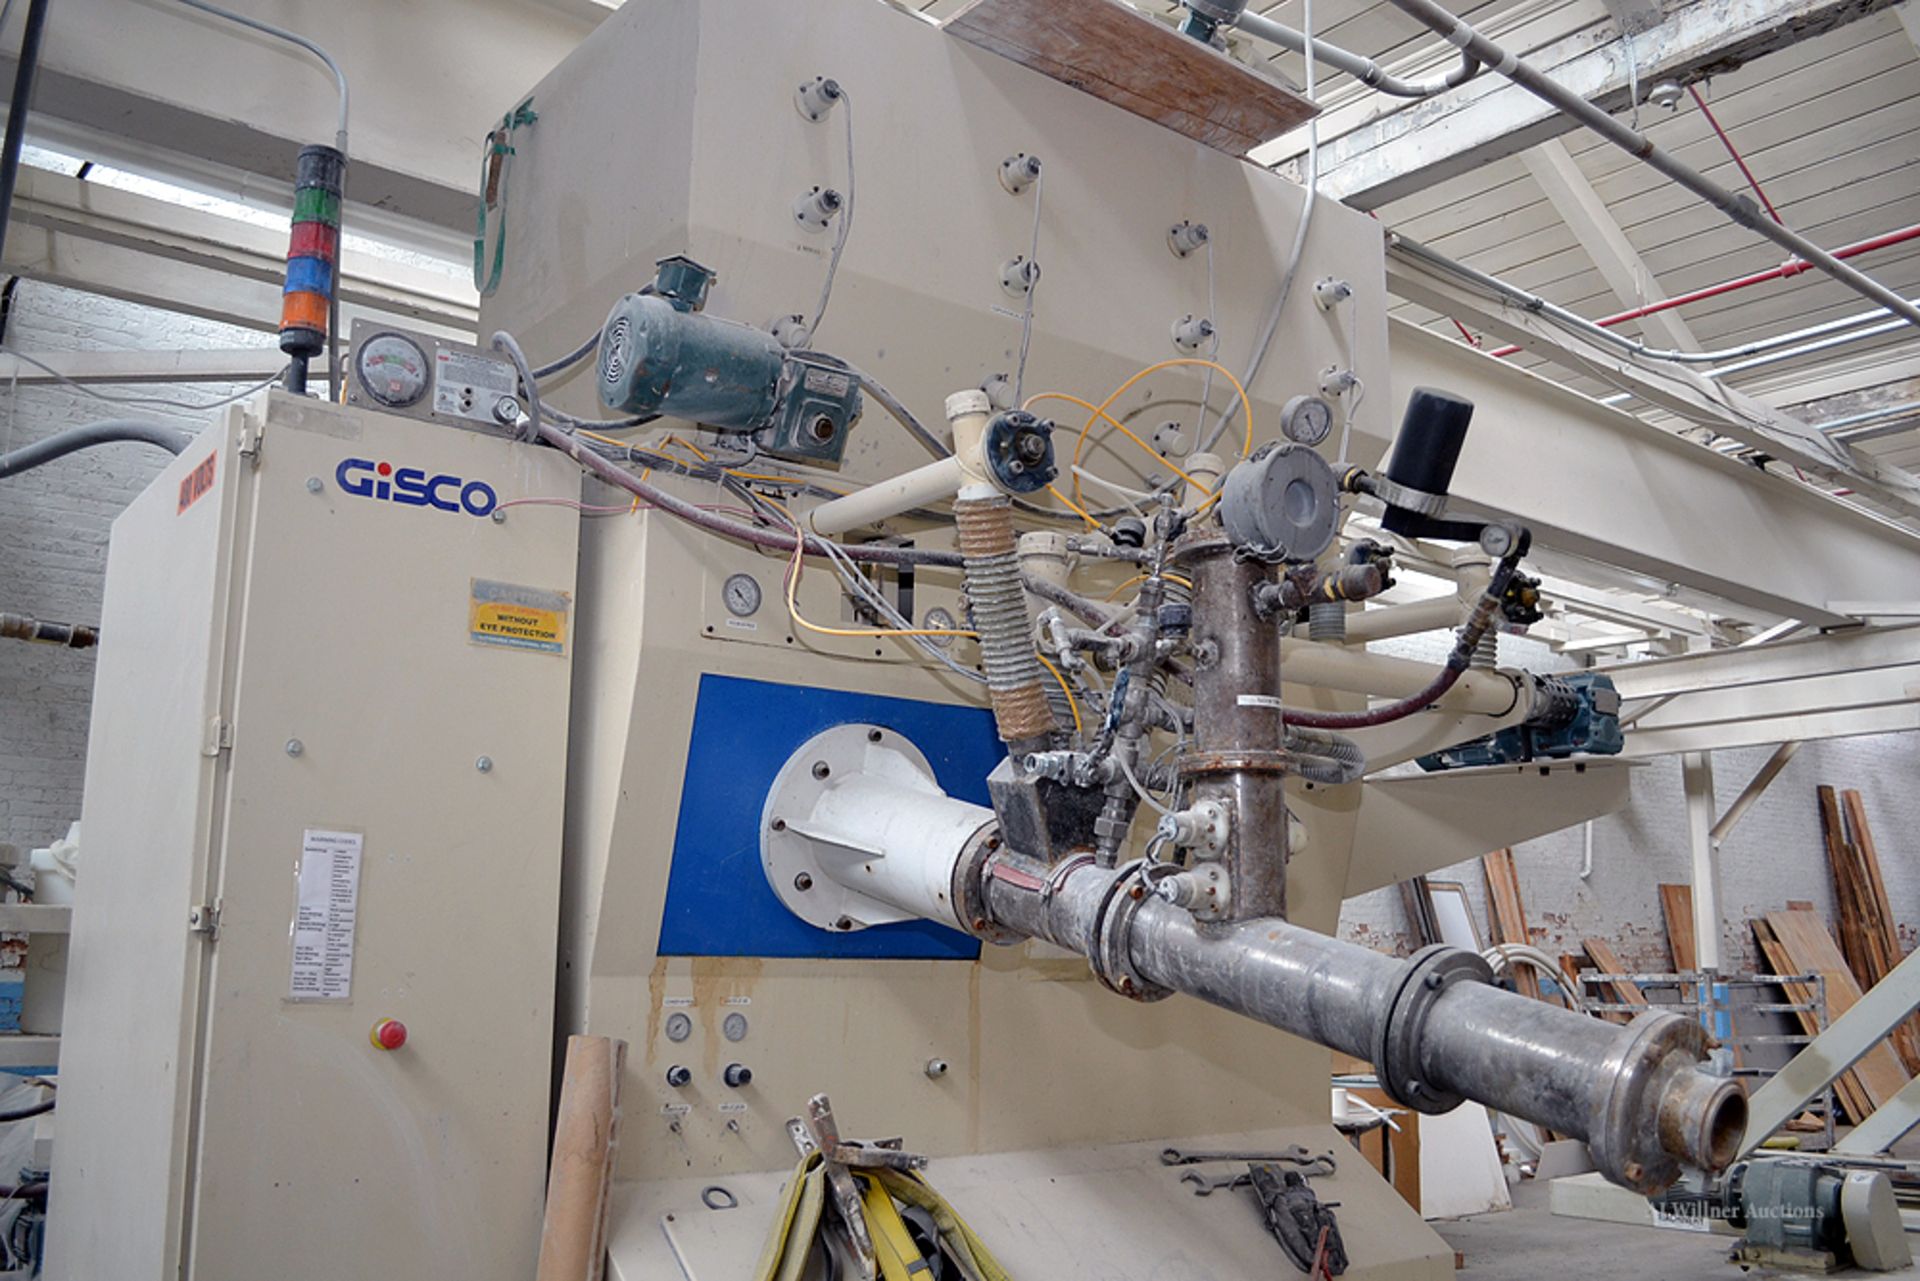 Gisco Solod Surface Continous Mixing & Dispensing Machine w/ Controlable Industrial Vacuum System - Image 3 of 7